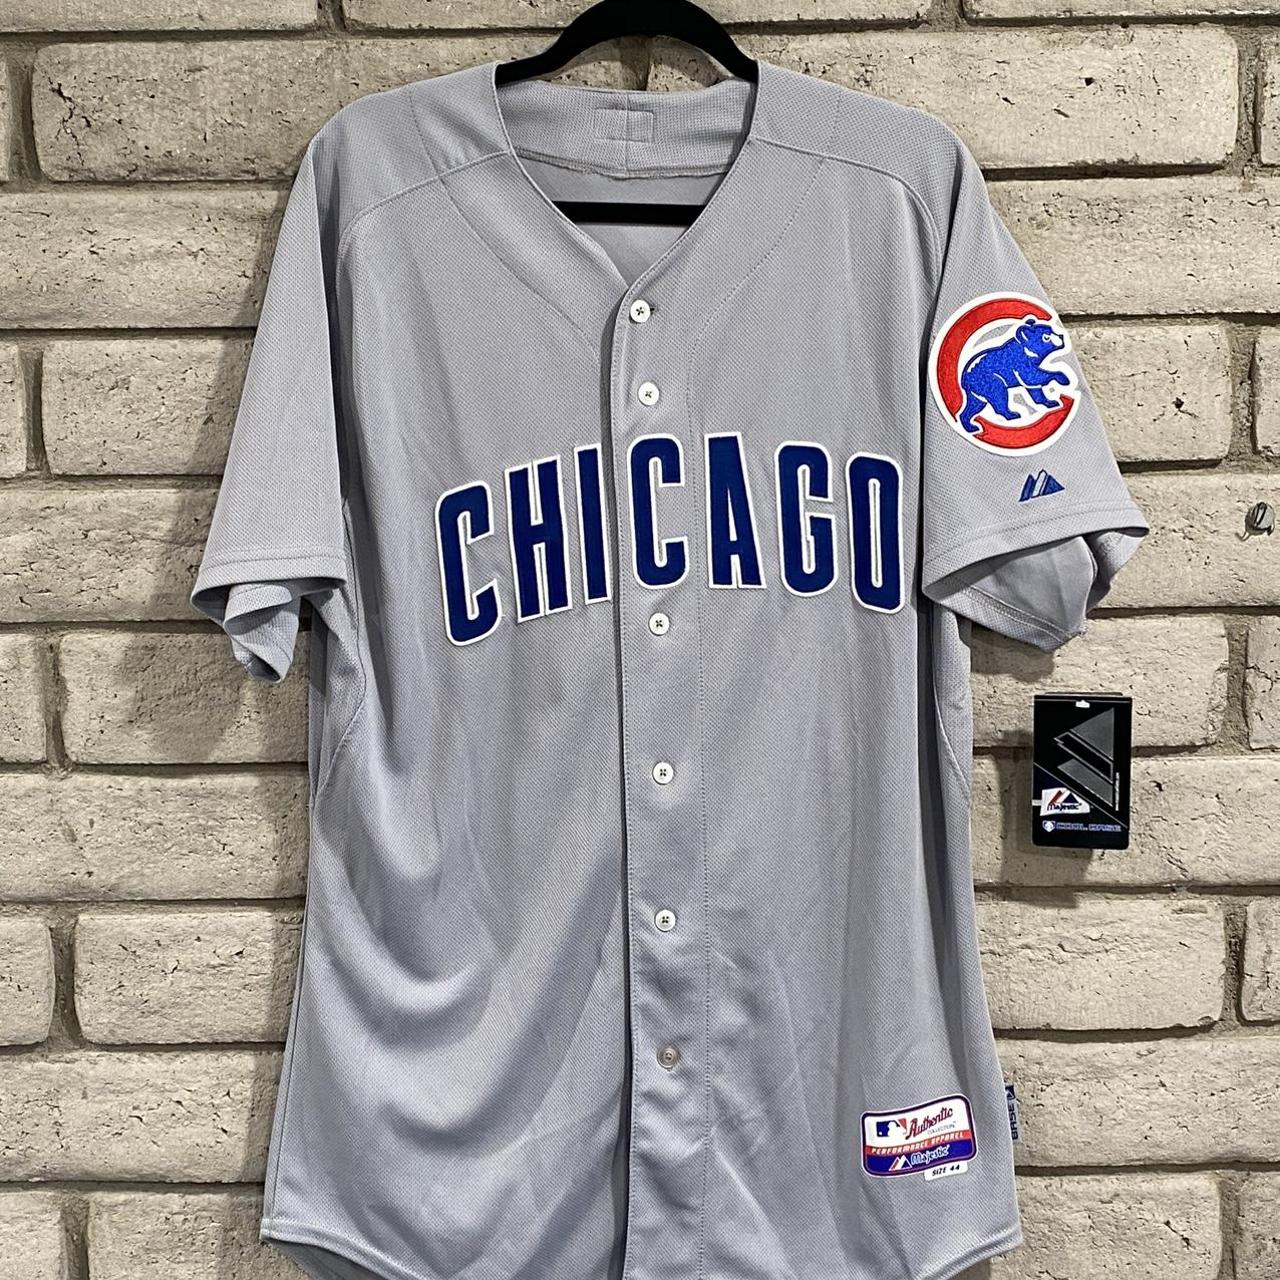 Majestic Chicago Cubs Authentic Road Baseball Jersey